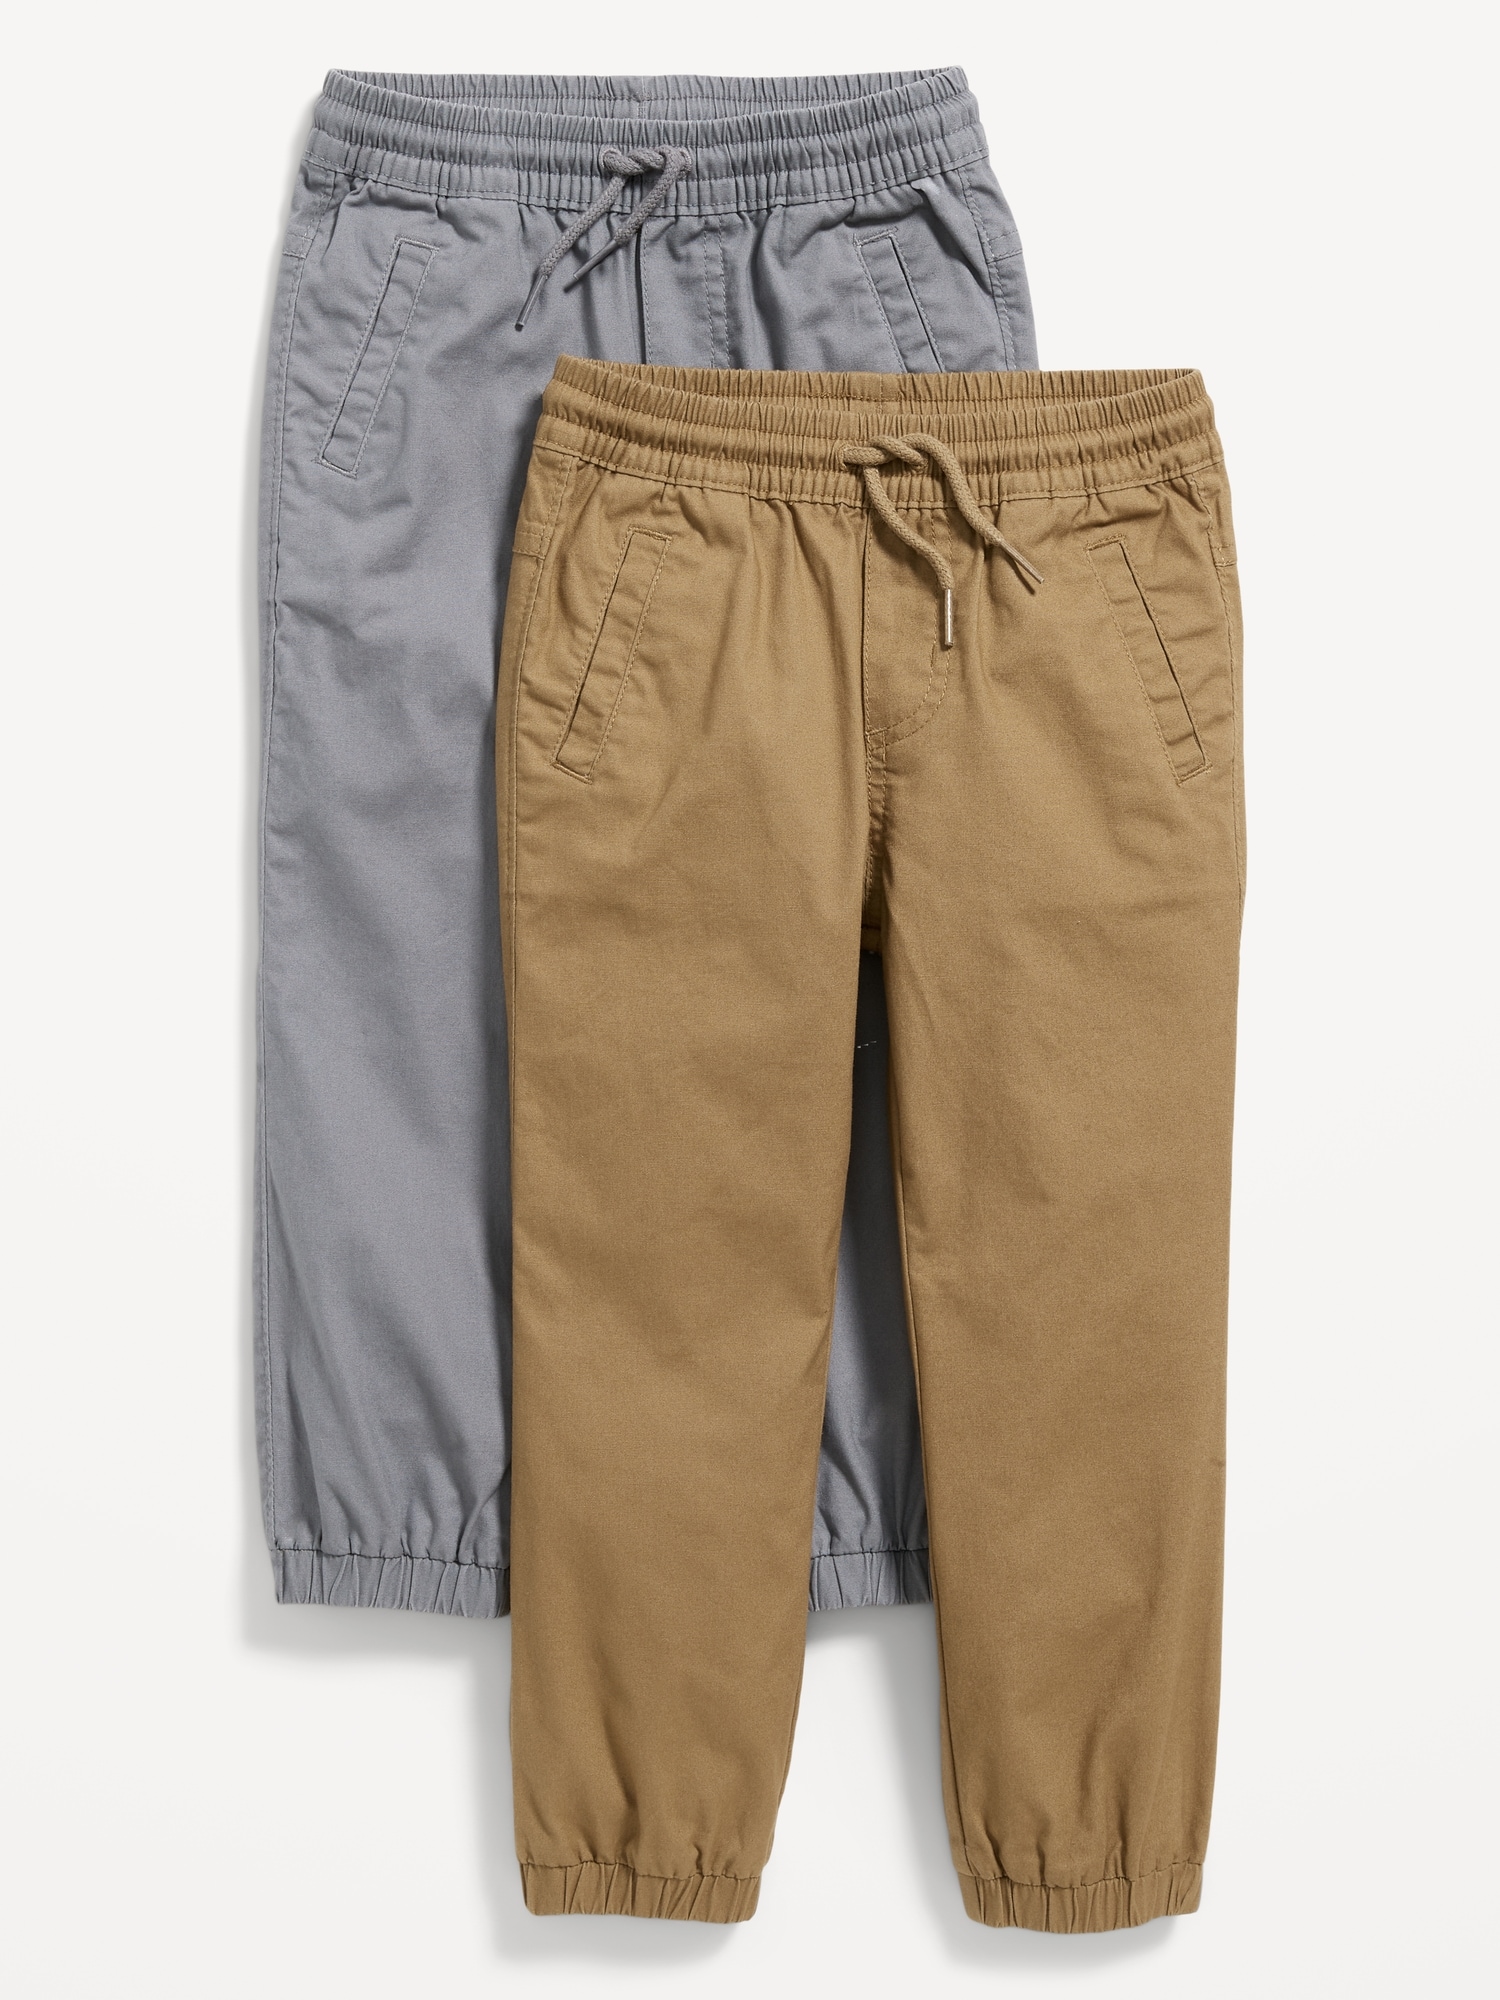 Old Navy Functional-Drawstring Canvas Jogger Pants 2-Pack for Toddler Boys gray. 1